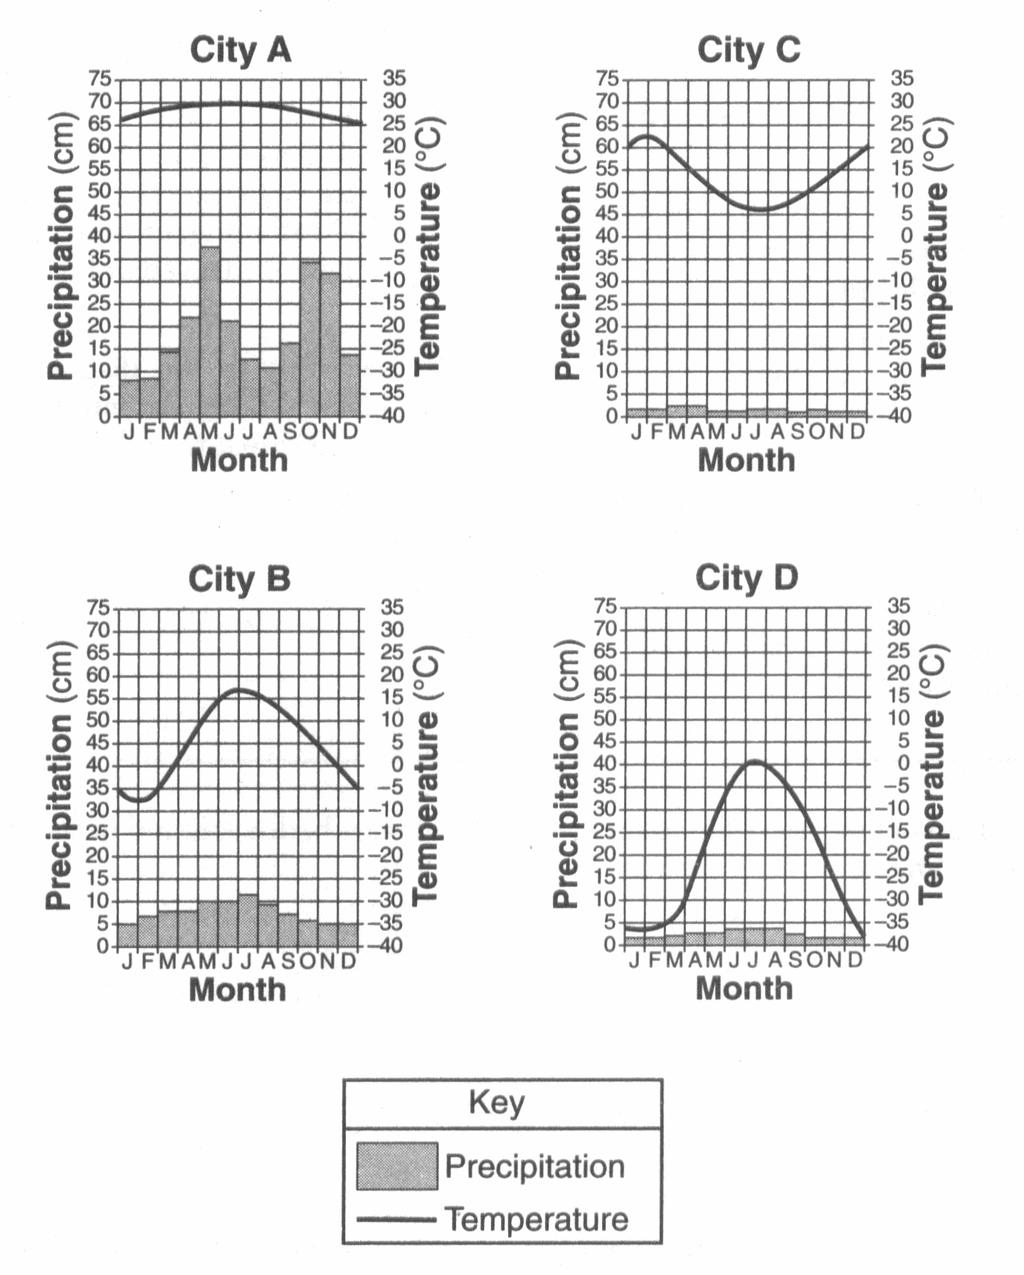 22. Base your answer to the following question on the climate graphs below, which show average monthly precipitation and temperatures at four cities, A, B, C, and D.